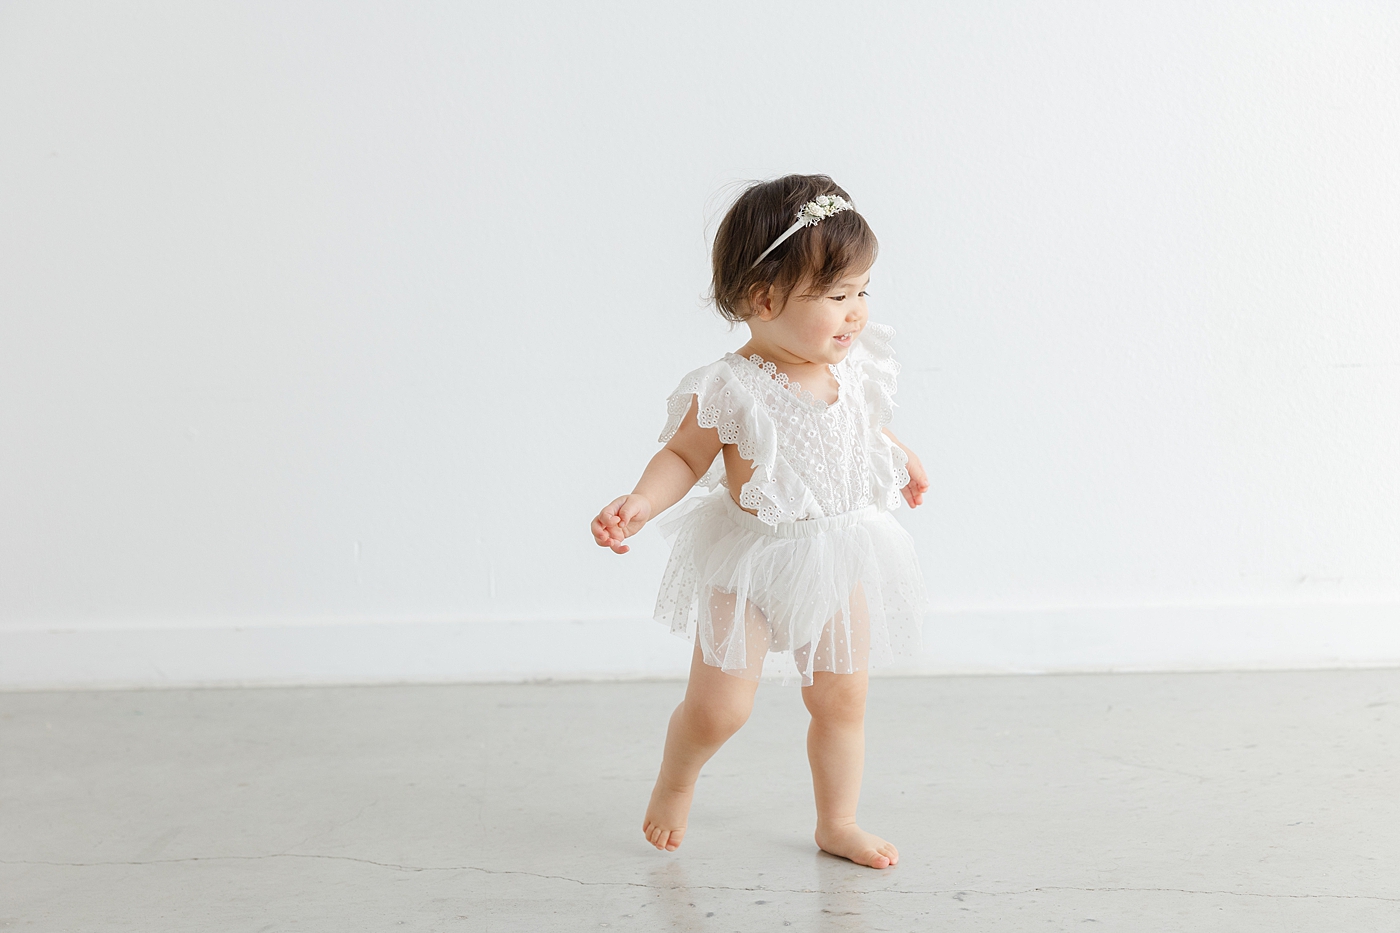 Baby girl in a white dress walking in the studio | Image by Sana Ahmed Photography